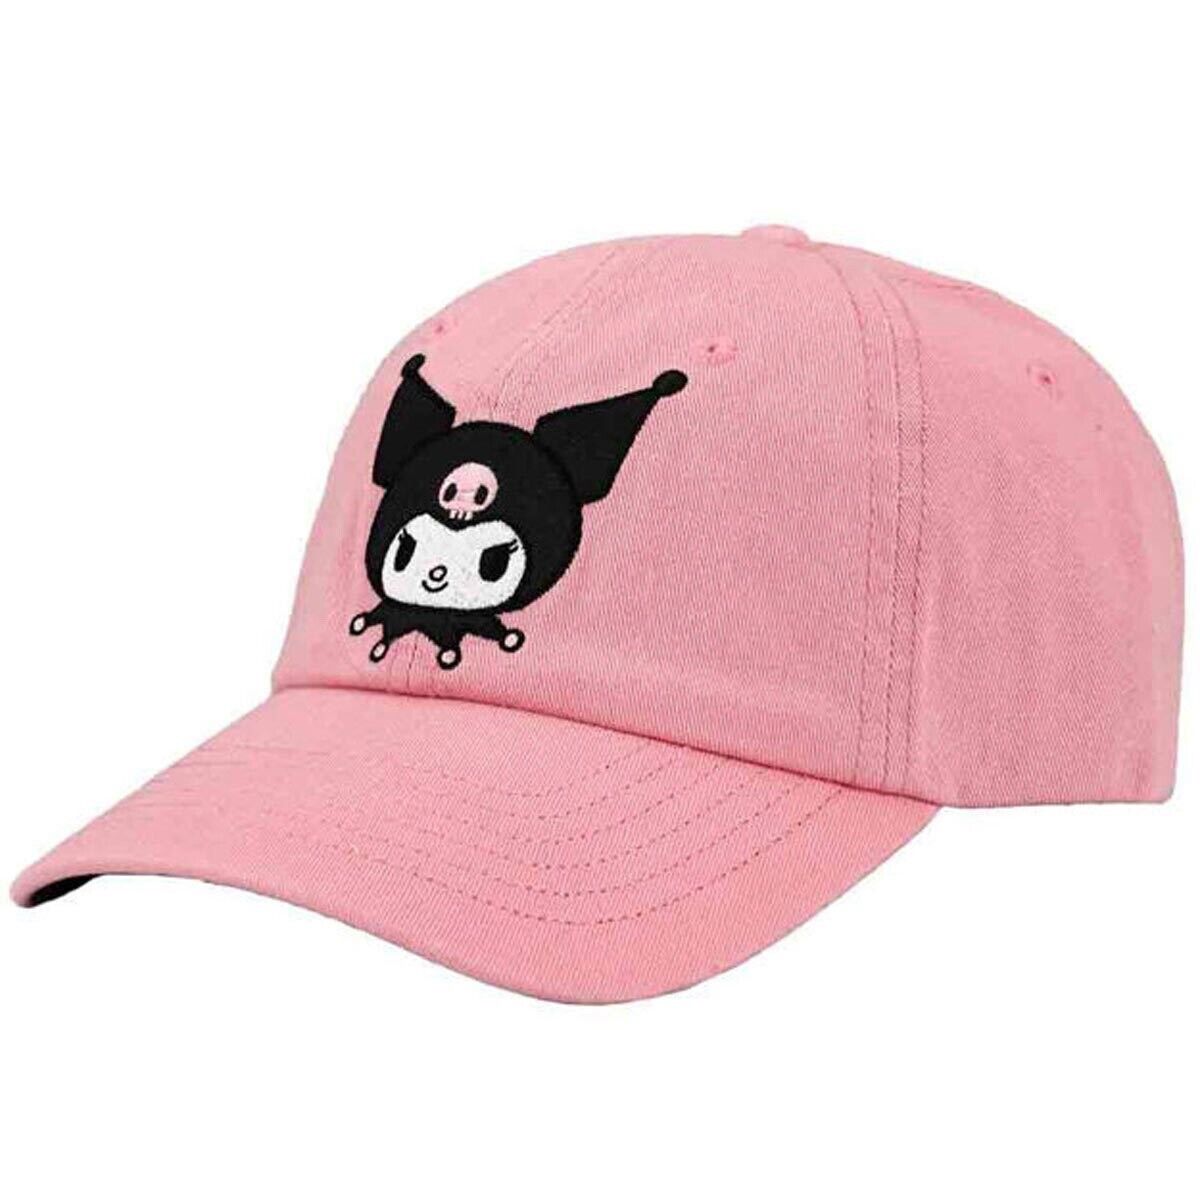 Bioworld • KUROMI Embroidered Pink Cotton Hat • One Size • Ships Free